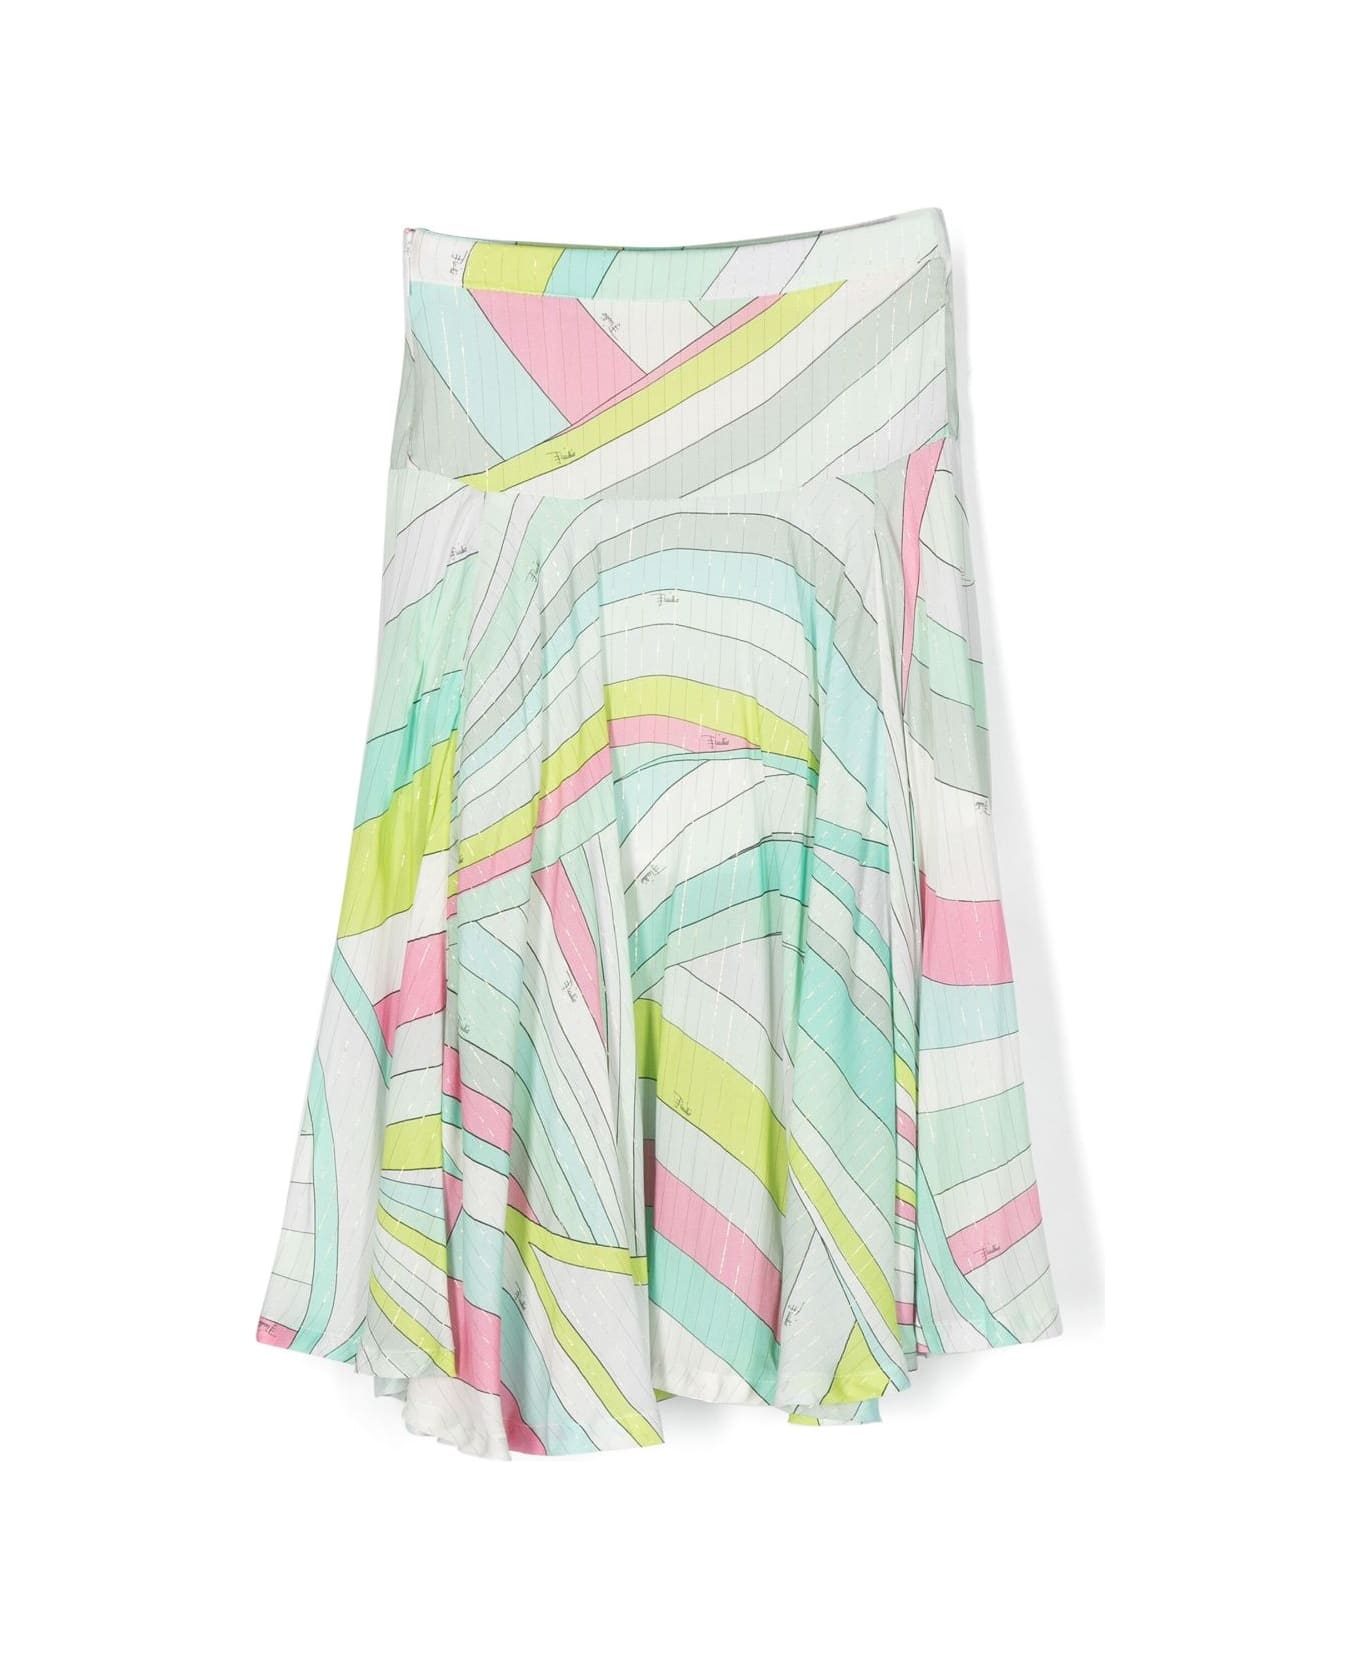 Pucci Pleated Skirt - Light blue